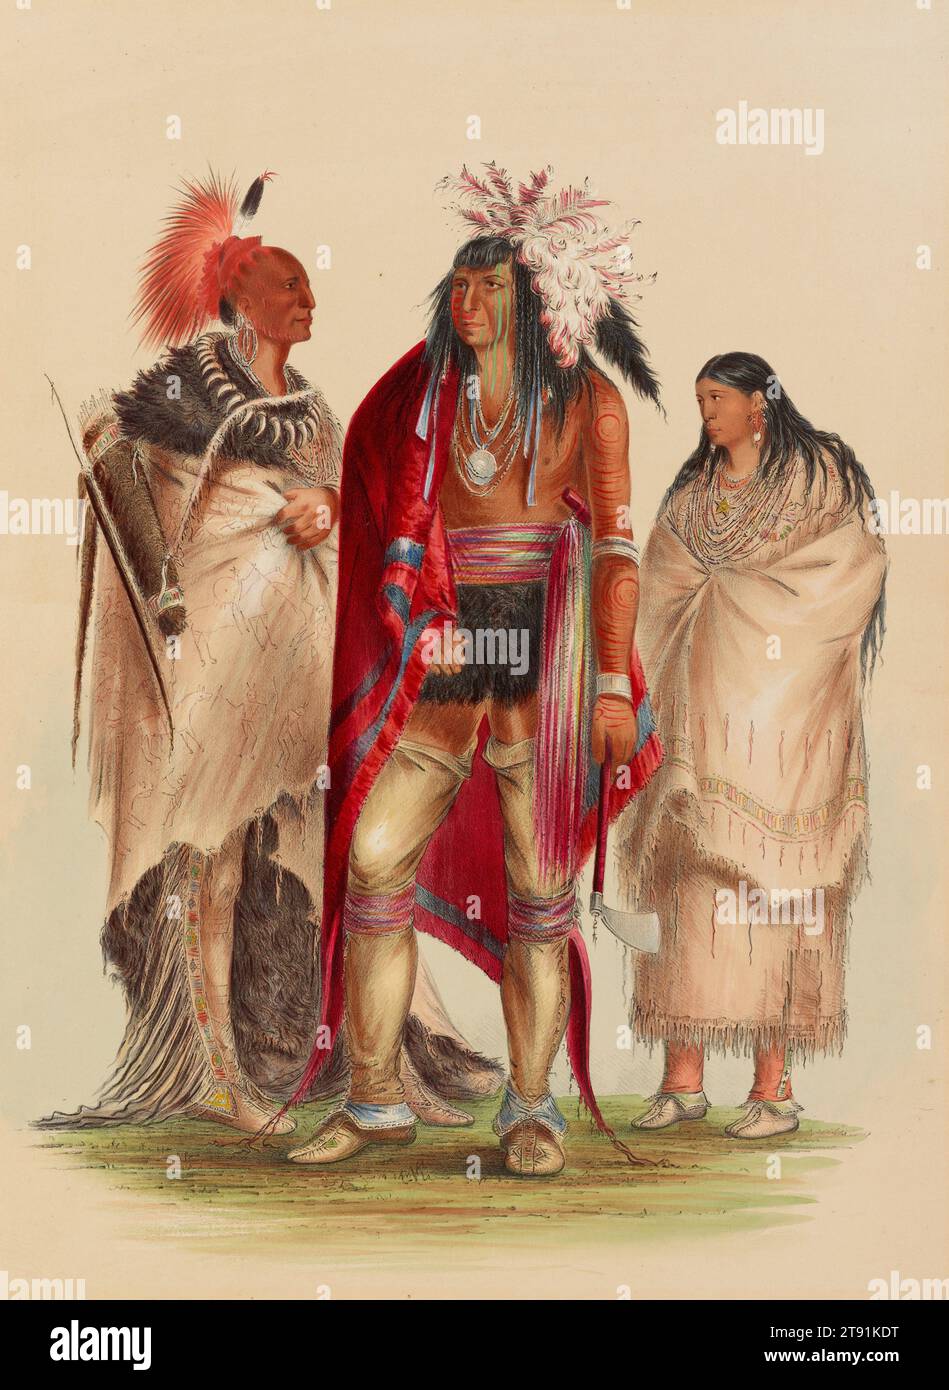 Group of North American Indians from Life, 1844, George Catlin; Printer: Day & Haghe, London, American, 1796 - 1872, 17 11/16 x 13 in. (44.93 x 33.02 cm) (image, sheet), Hand-colored lithograph, United States, 19th century Stock Photo